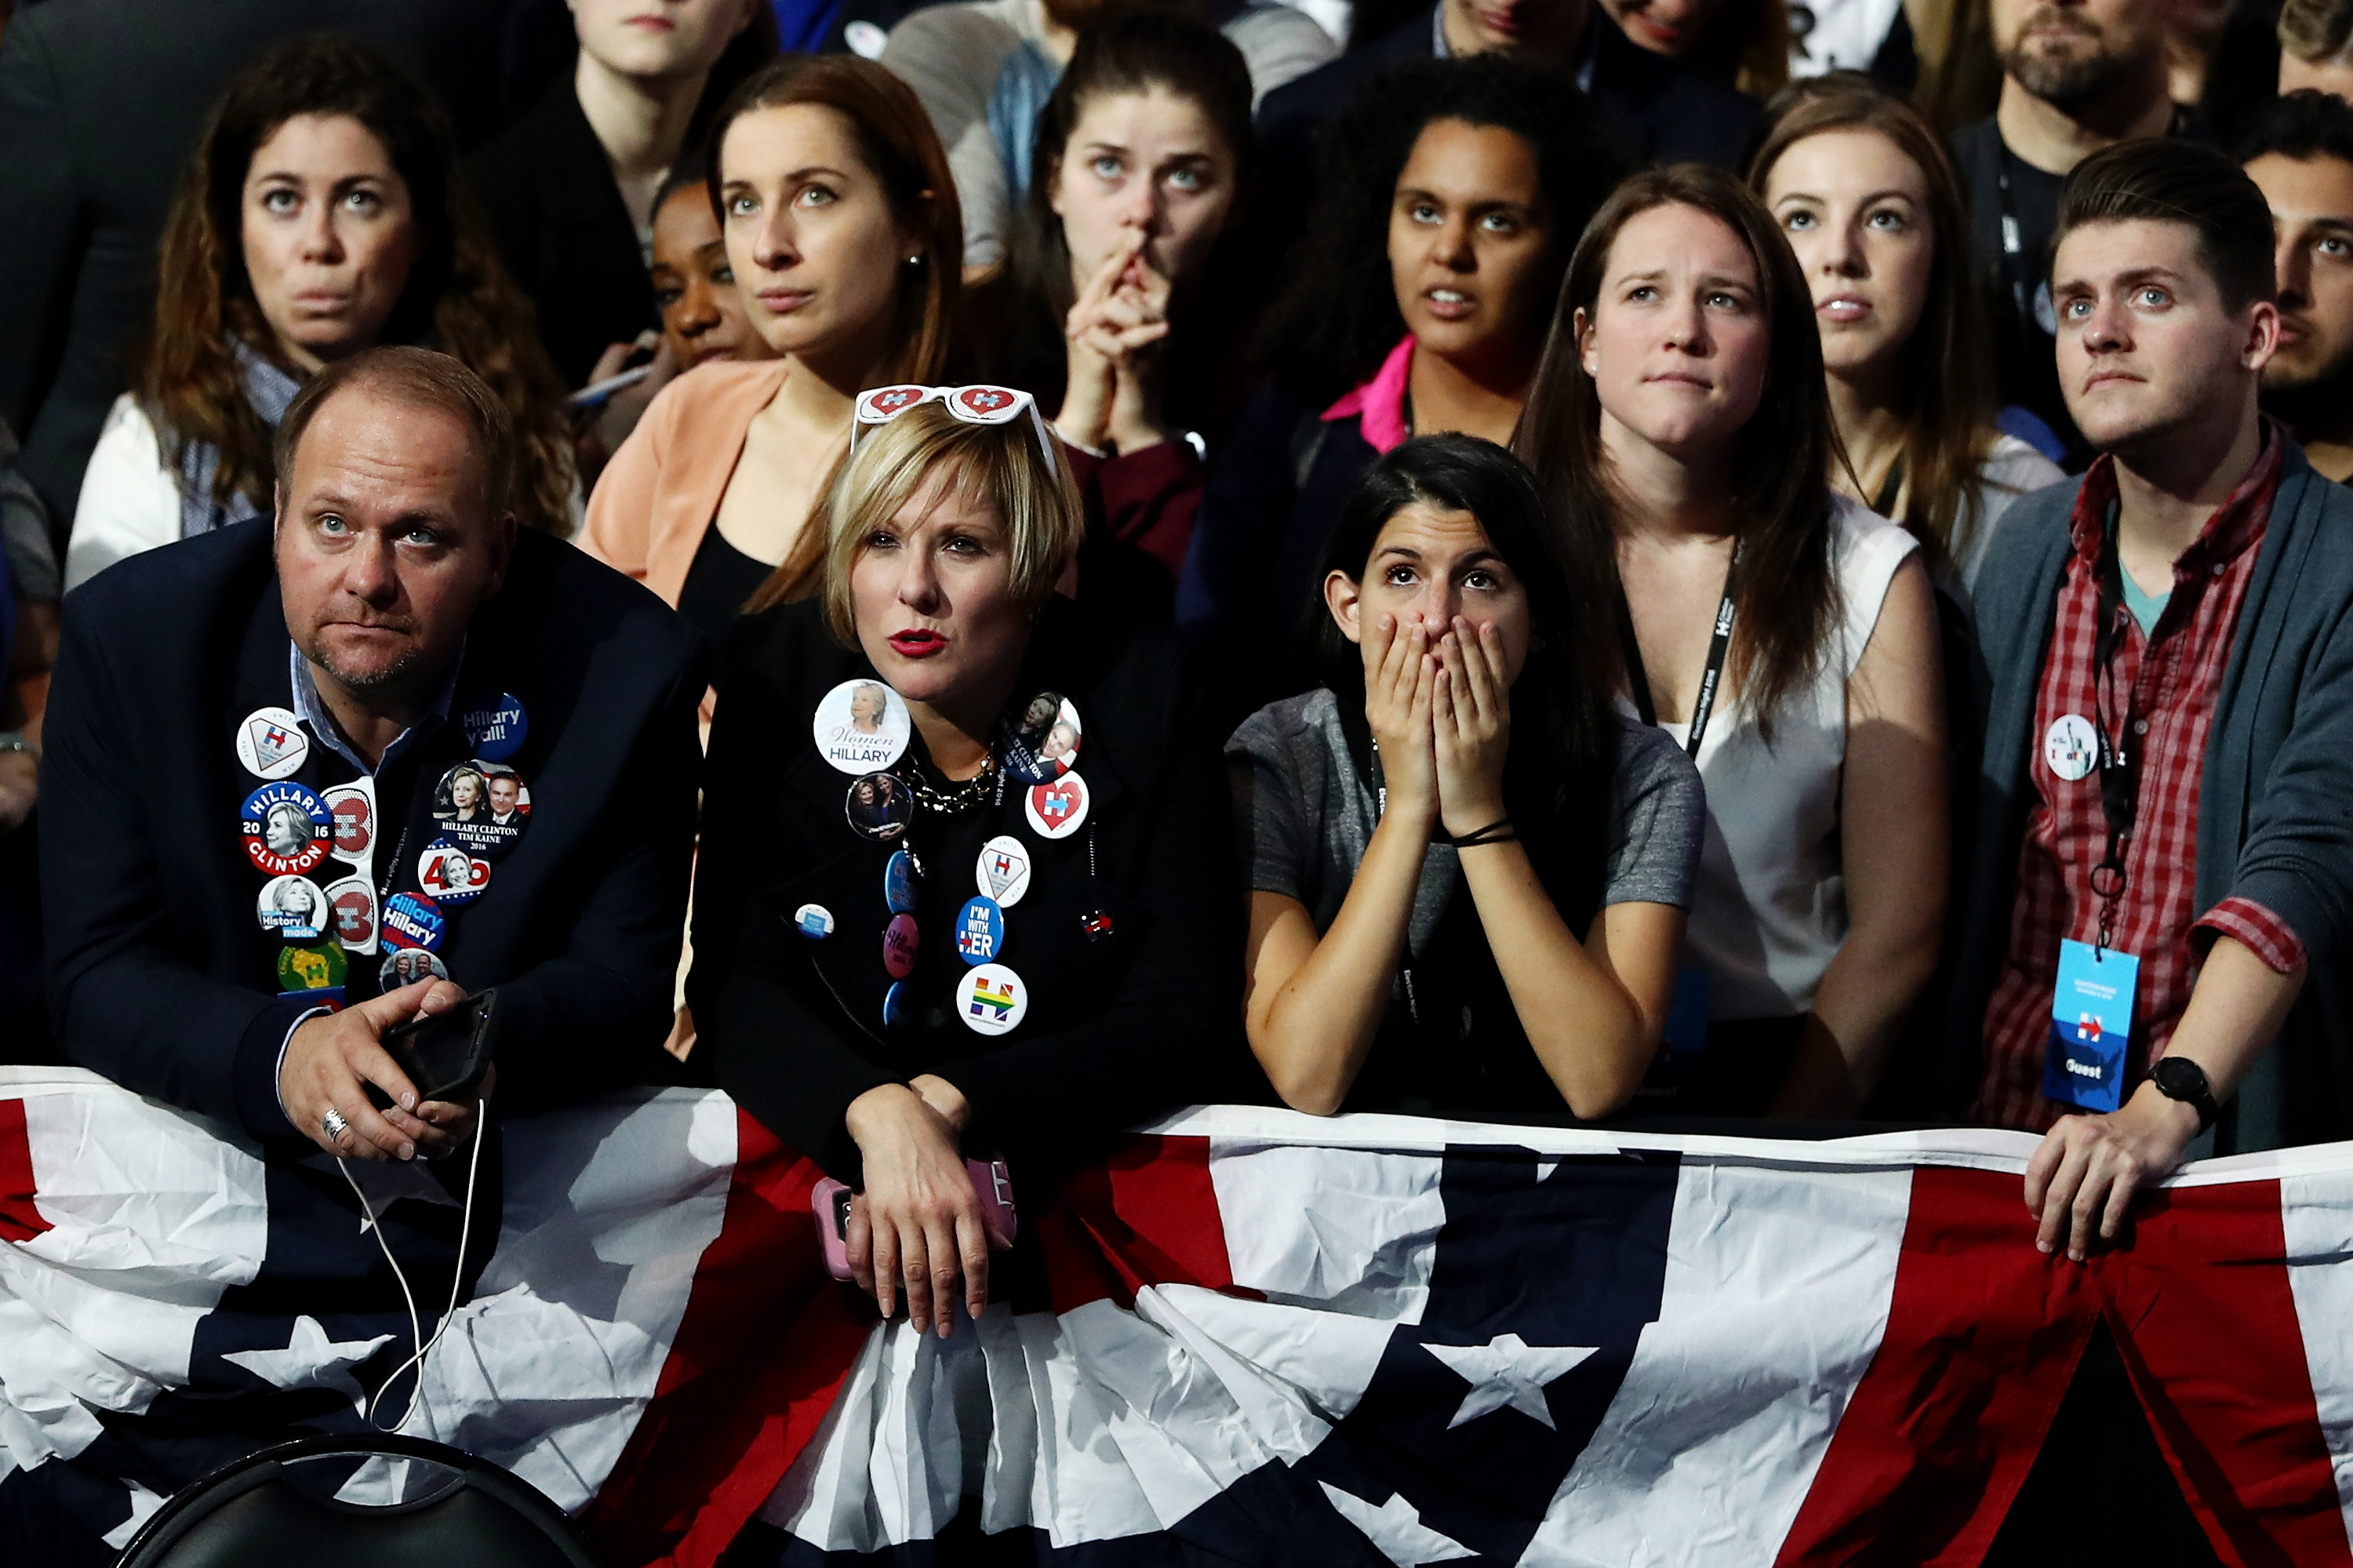 People watch voting results at Democratic presidential nominee former Secretary of State Hillary Clinton's election night event at the Jacob K. Javits Convention Center November 8, 2016 in New York City. 